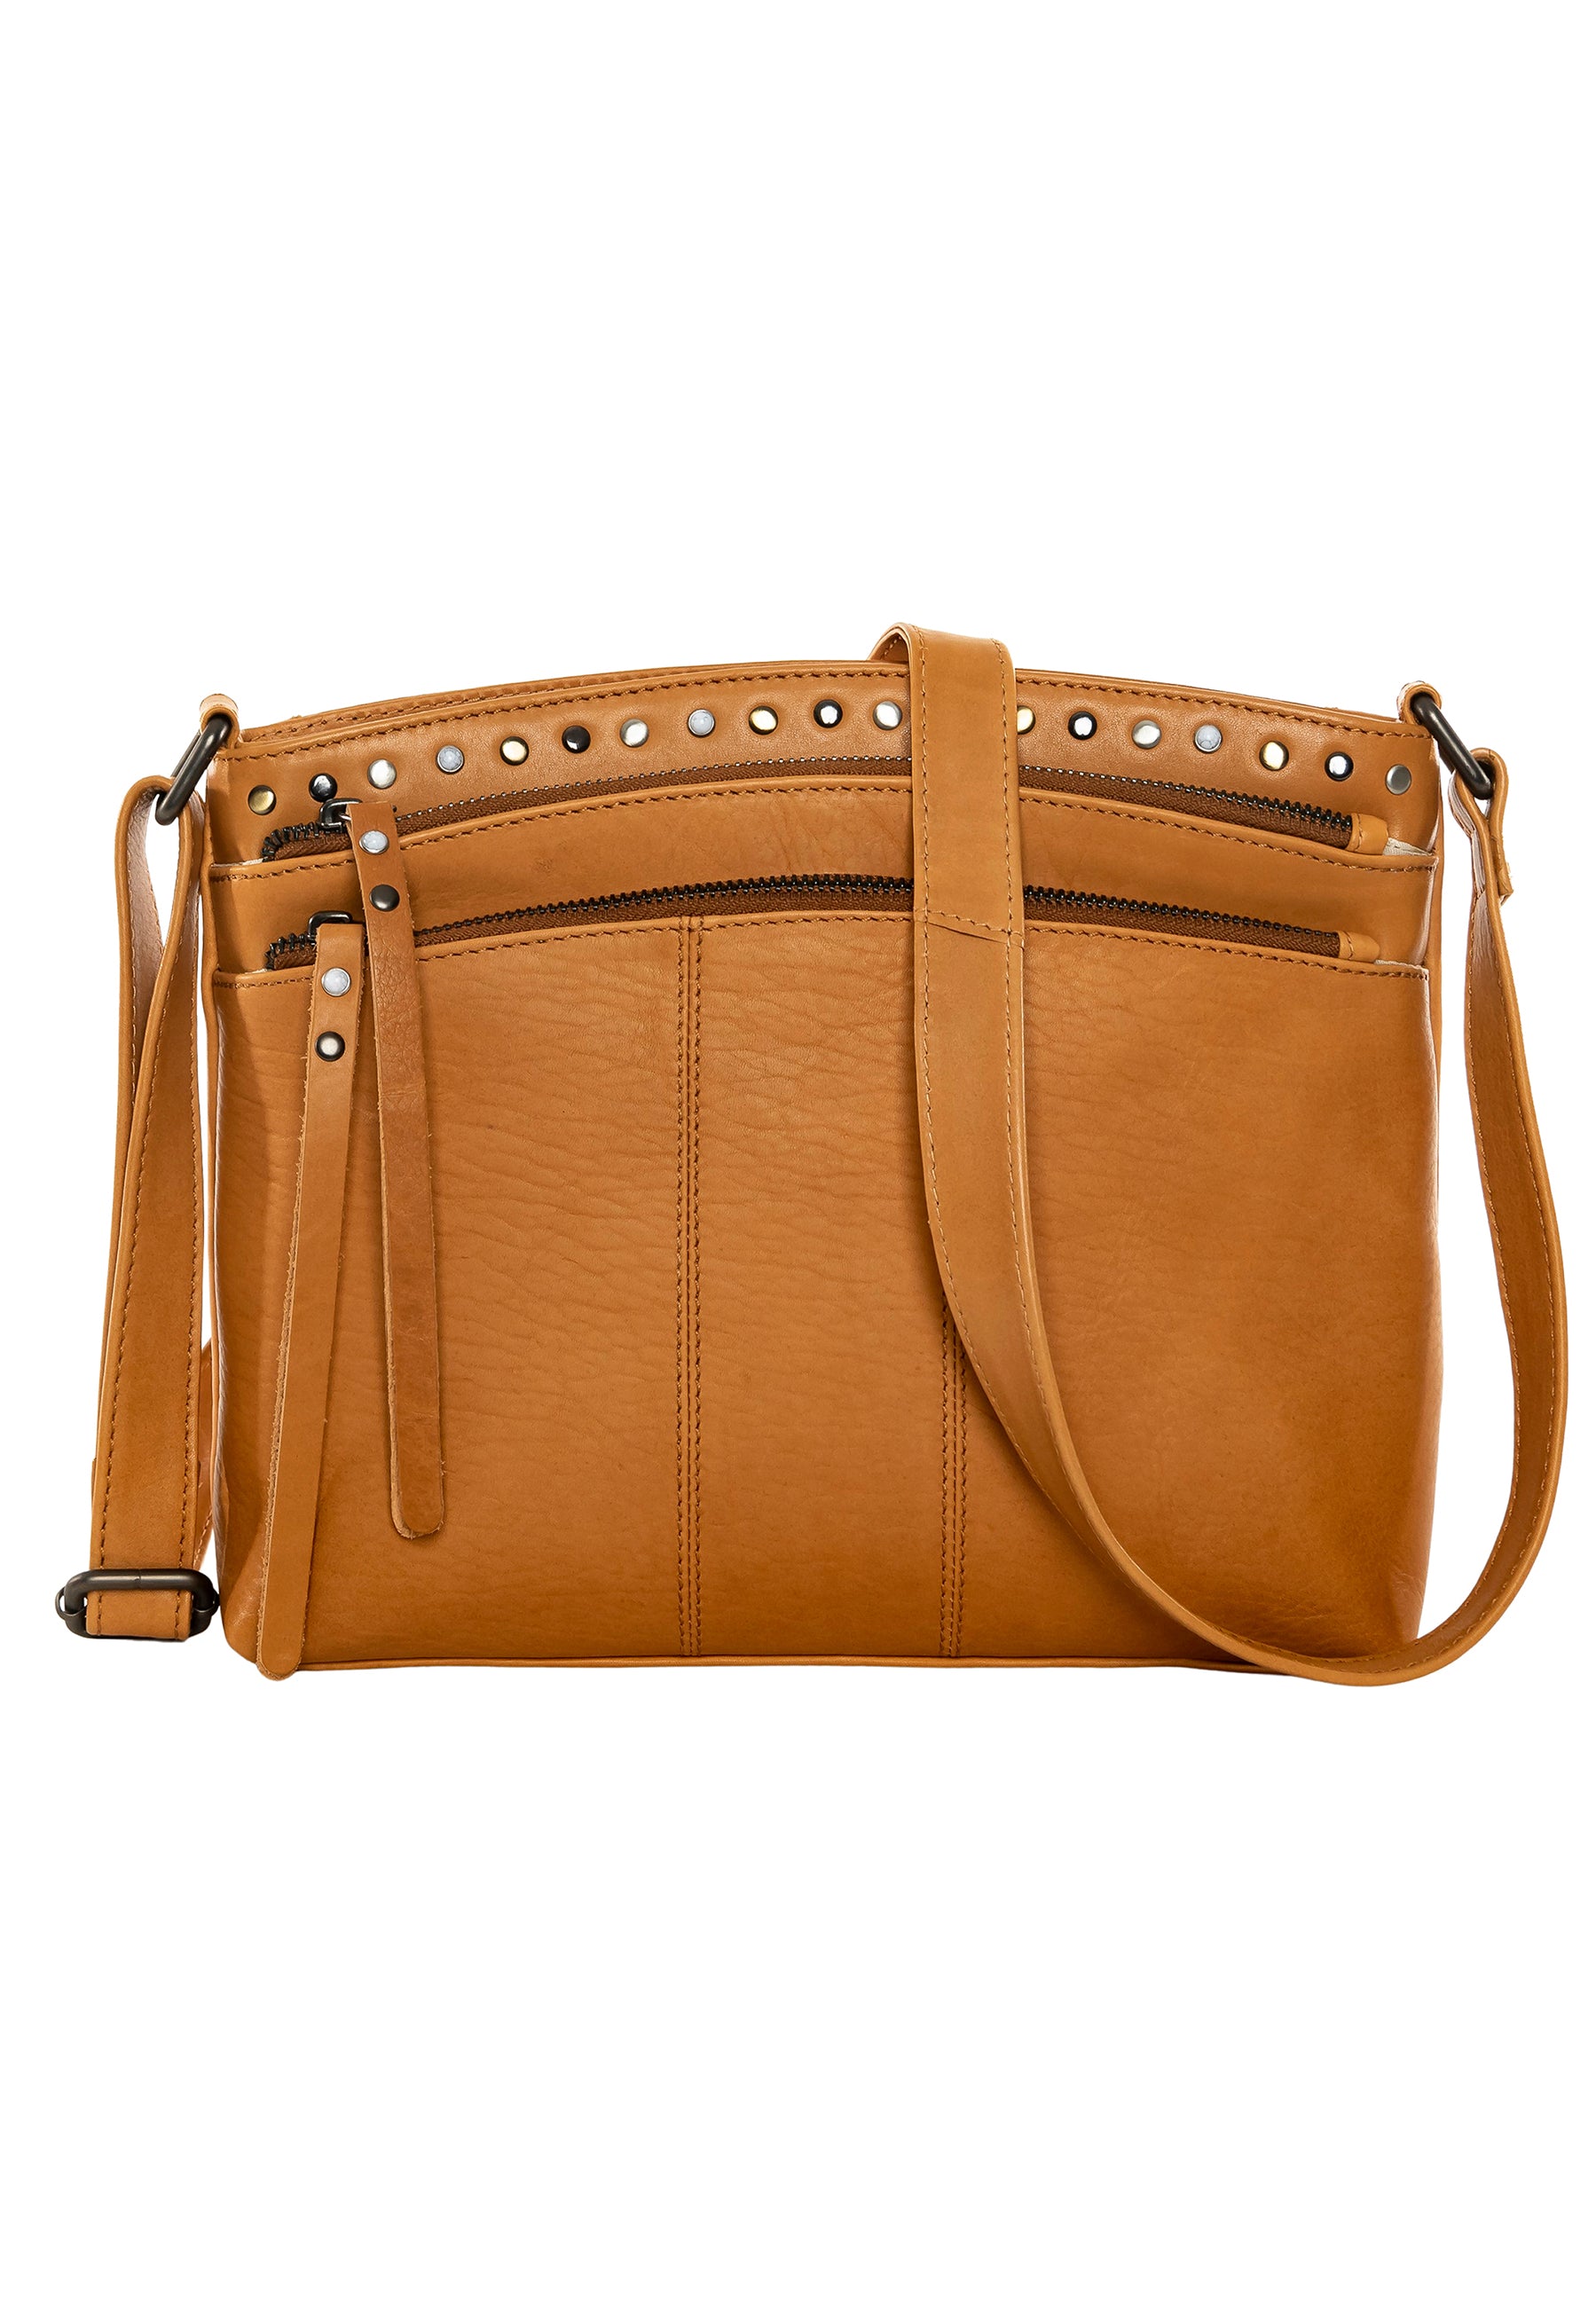 caramel leather conceal carry bag with studs